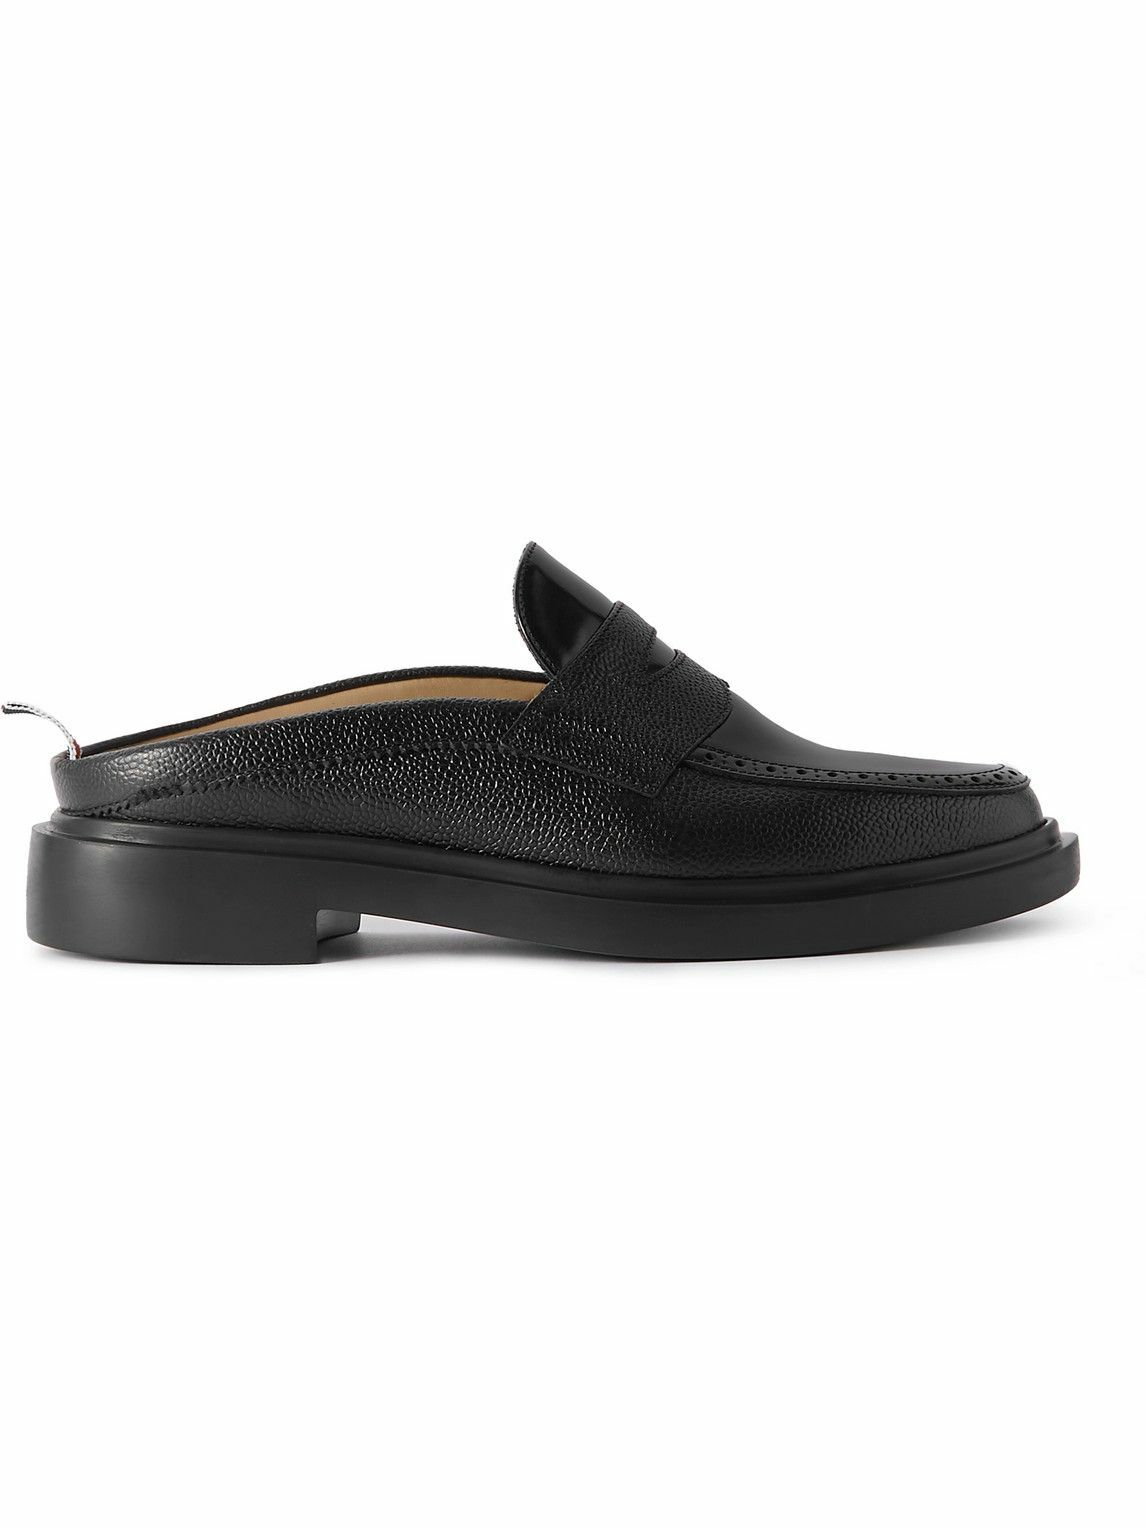 Photo: Thom Browne - Full-Grain Leather Backless Penny Loafers - Black